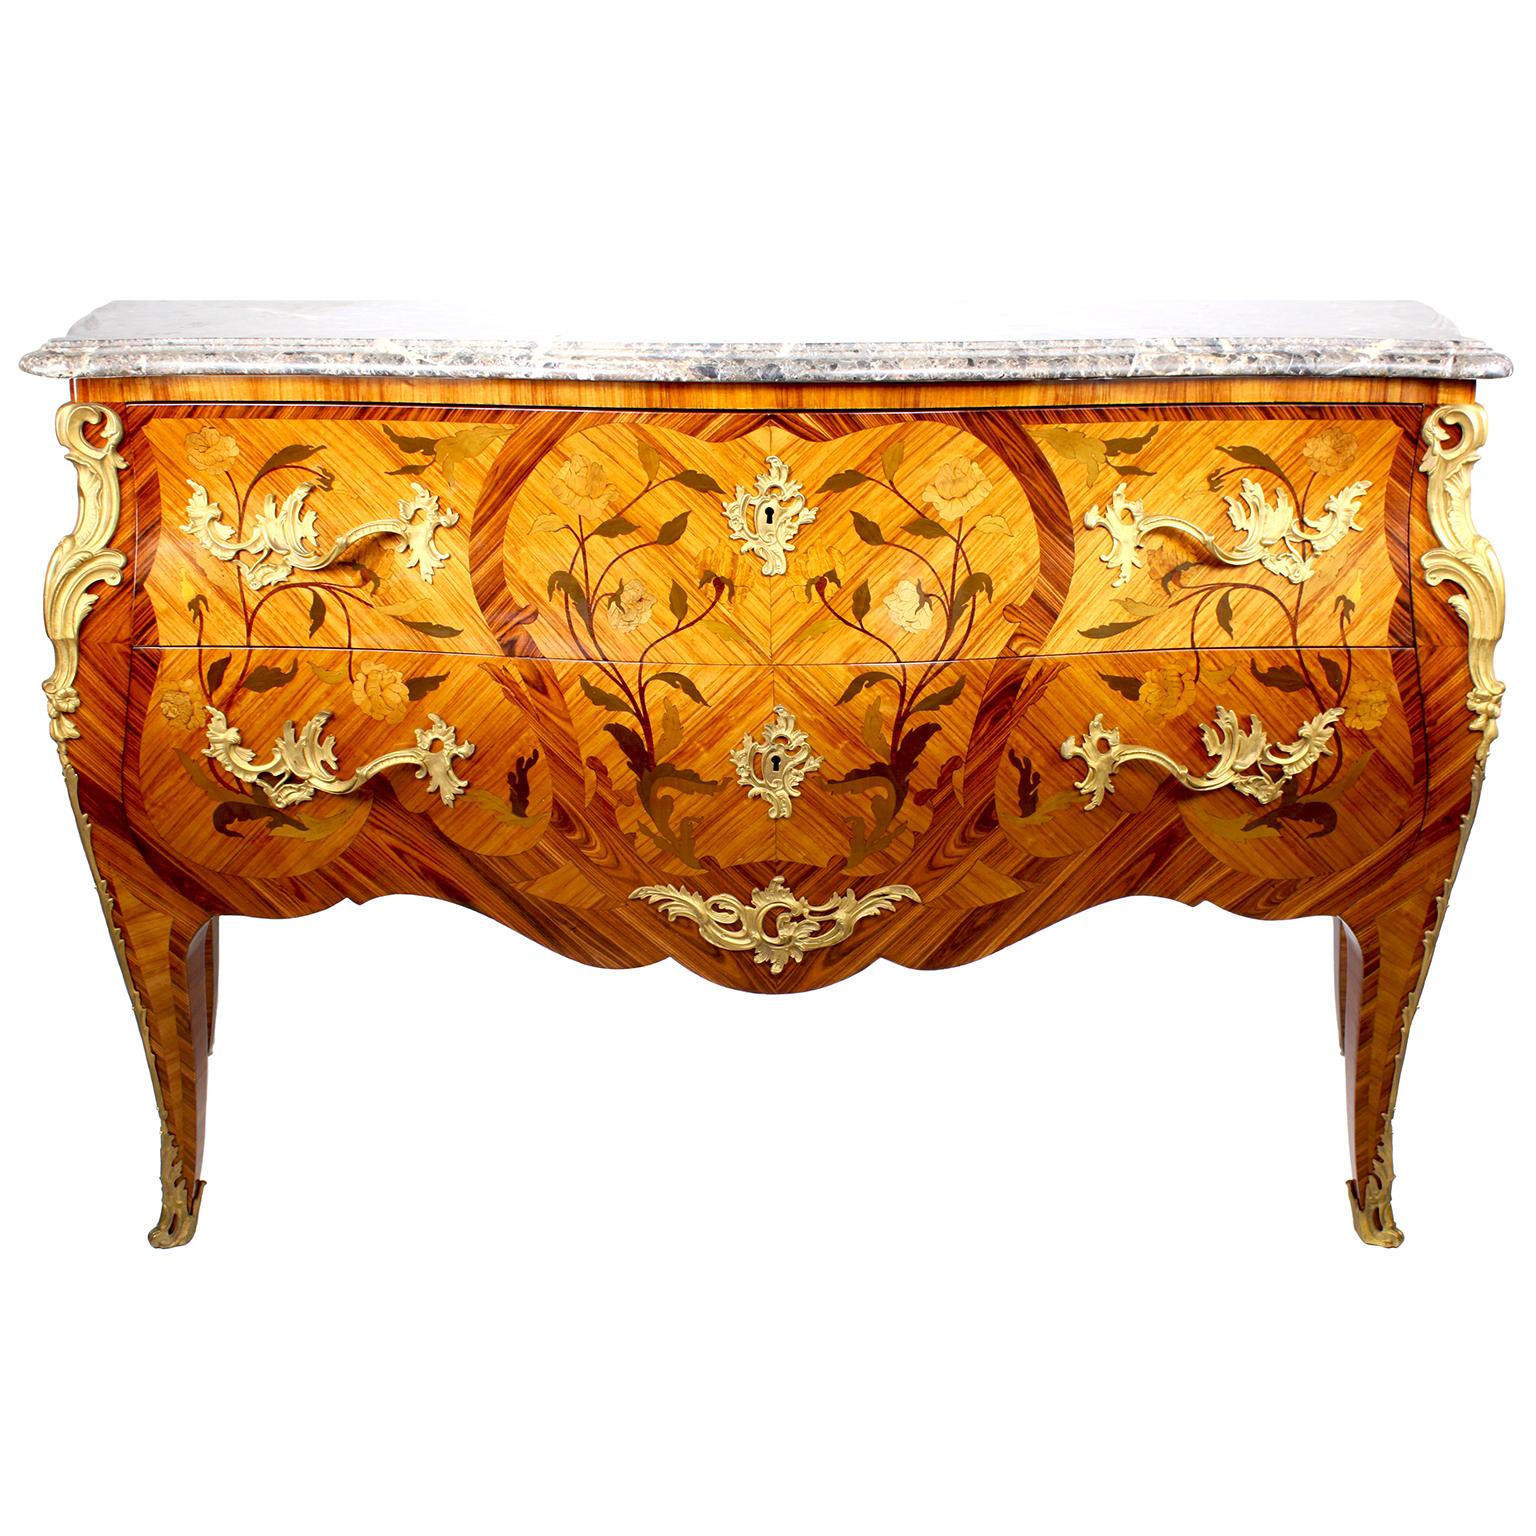 A French Louis XV Style bois satiné, kingwood and amaranth - Ormolu Mounted Two-Drawer Bombé Commode with mottled marble top. The bowed front and sides with floral marquetry and floral ormolu handles with decorative elements. The top carcass